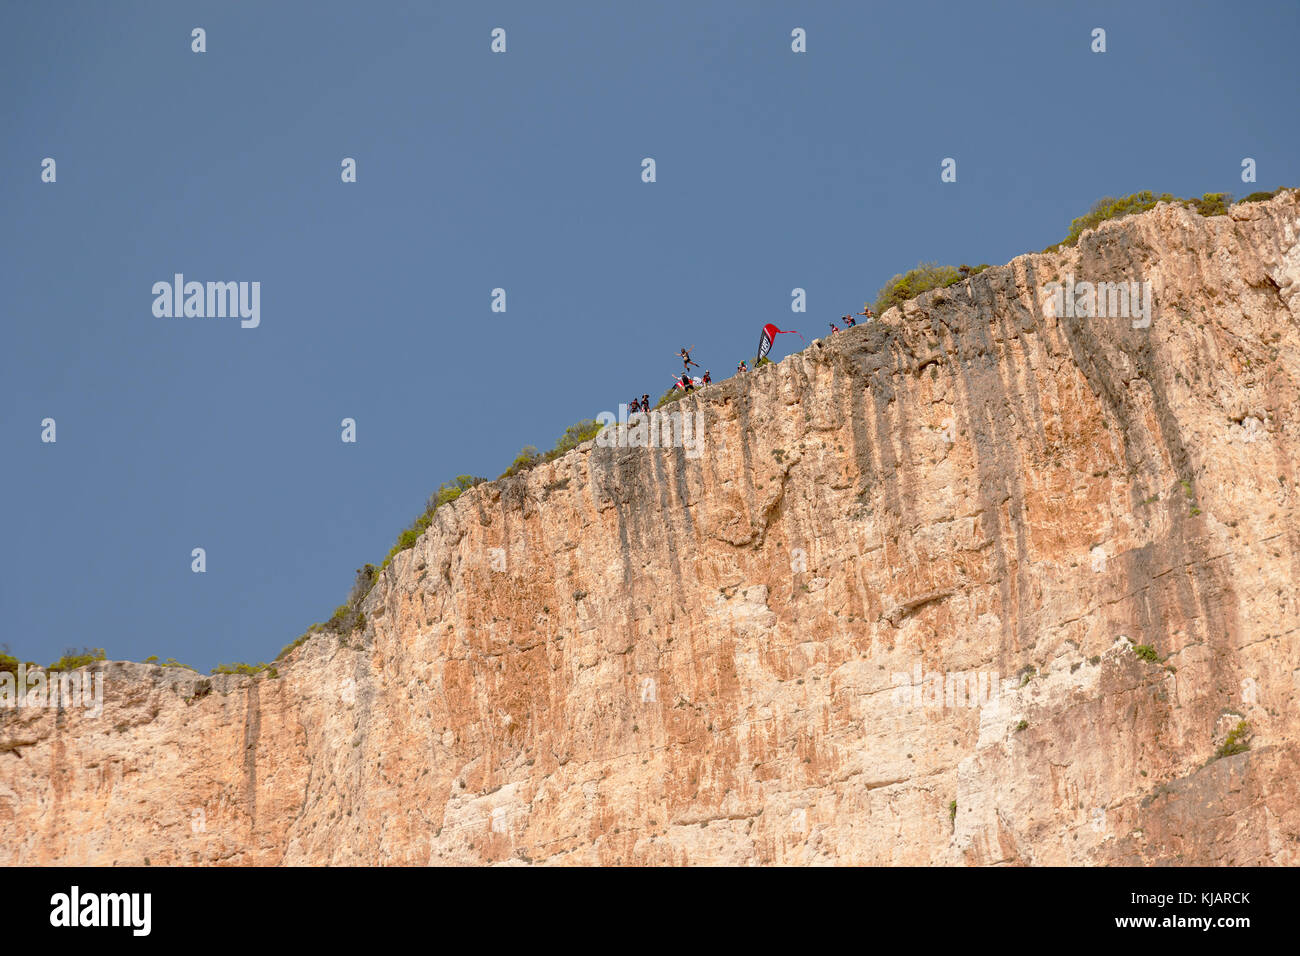 29th August 2015, base jump in the famous beach with an old shipwreck in Zakynthos island in Greece Stock Photo